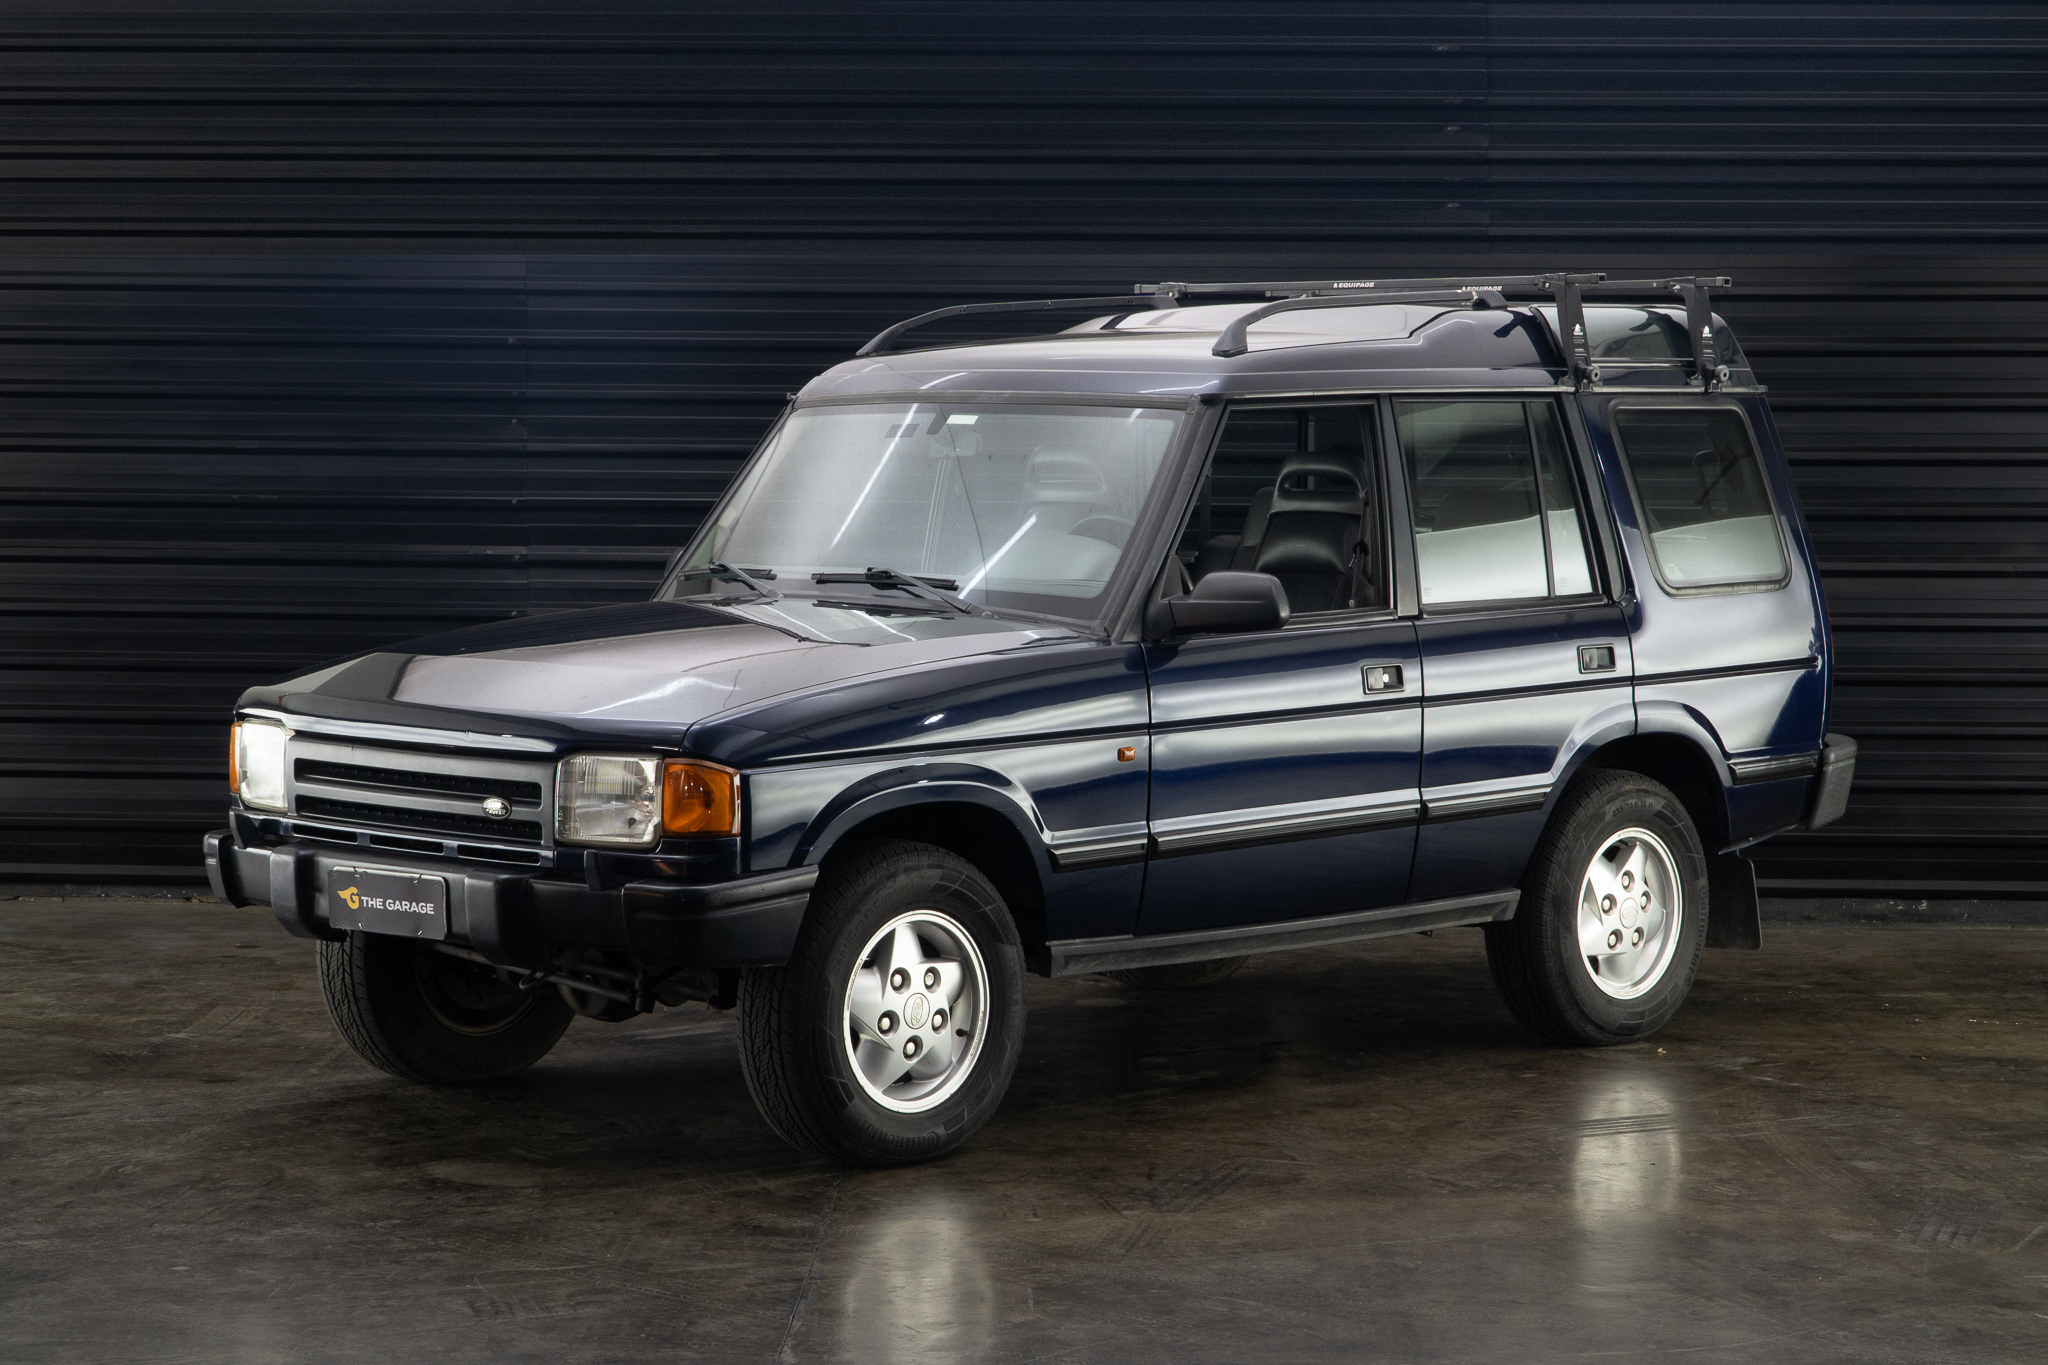 1997 Land Rover Discovery a venda the garage for sale